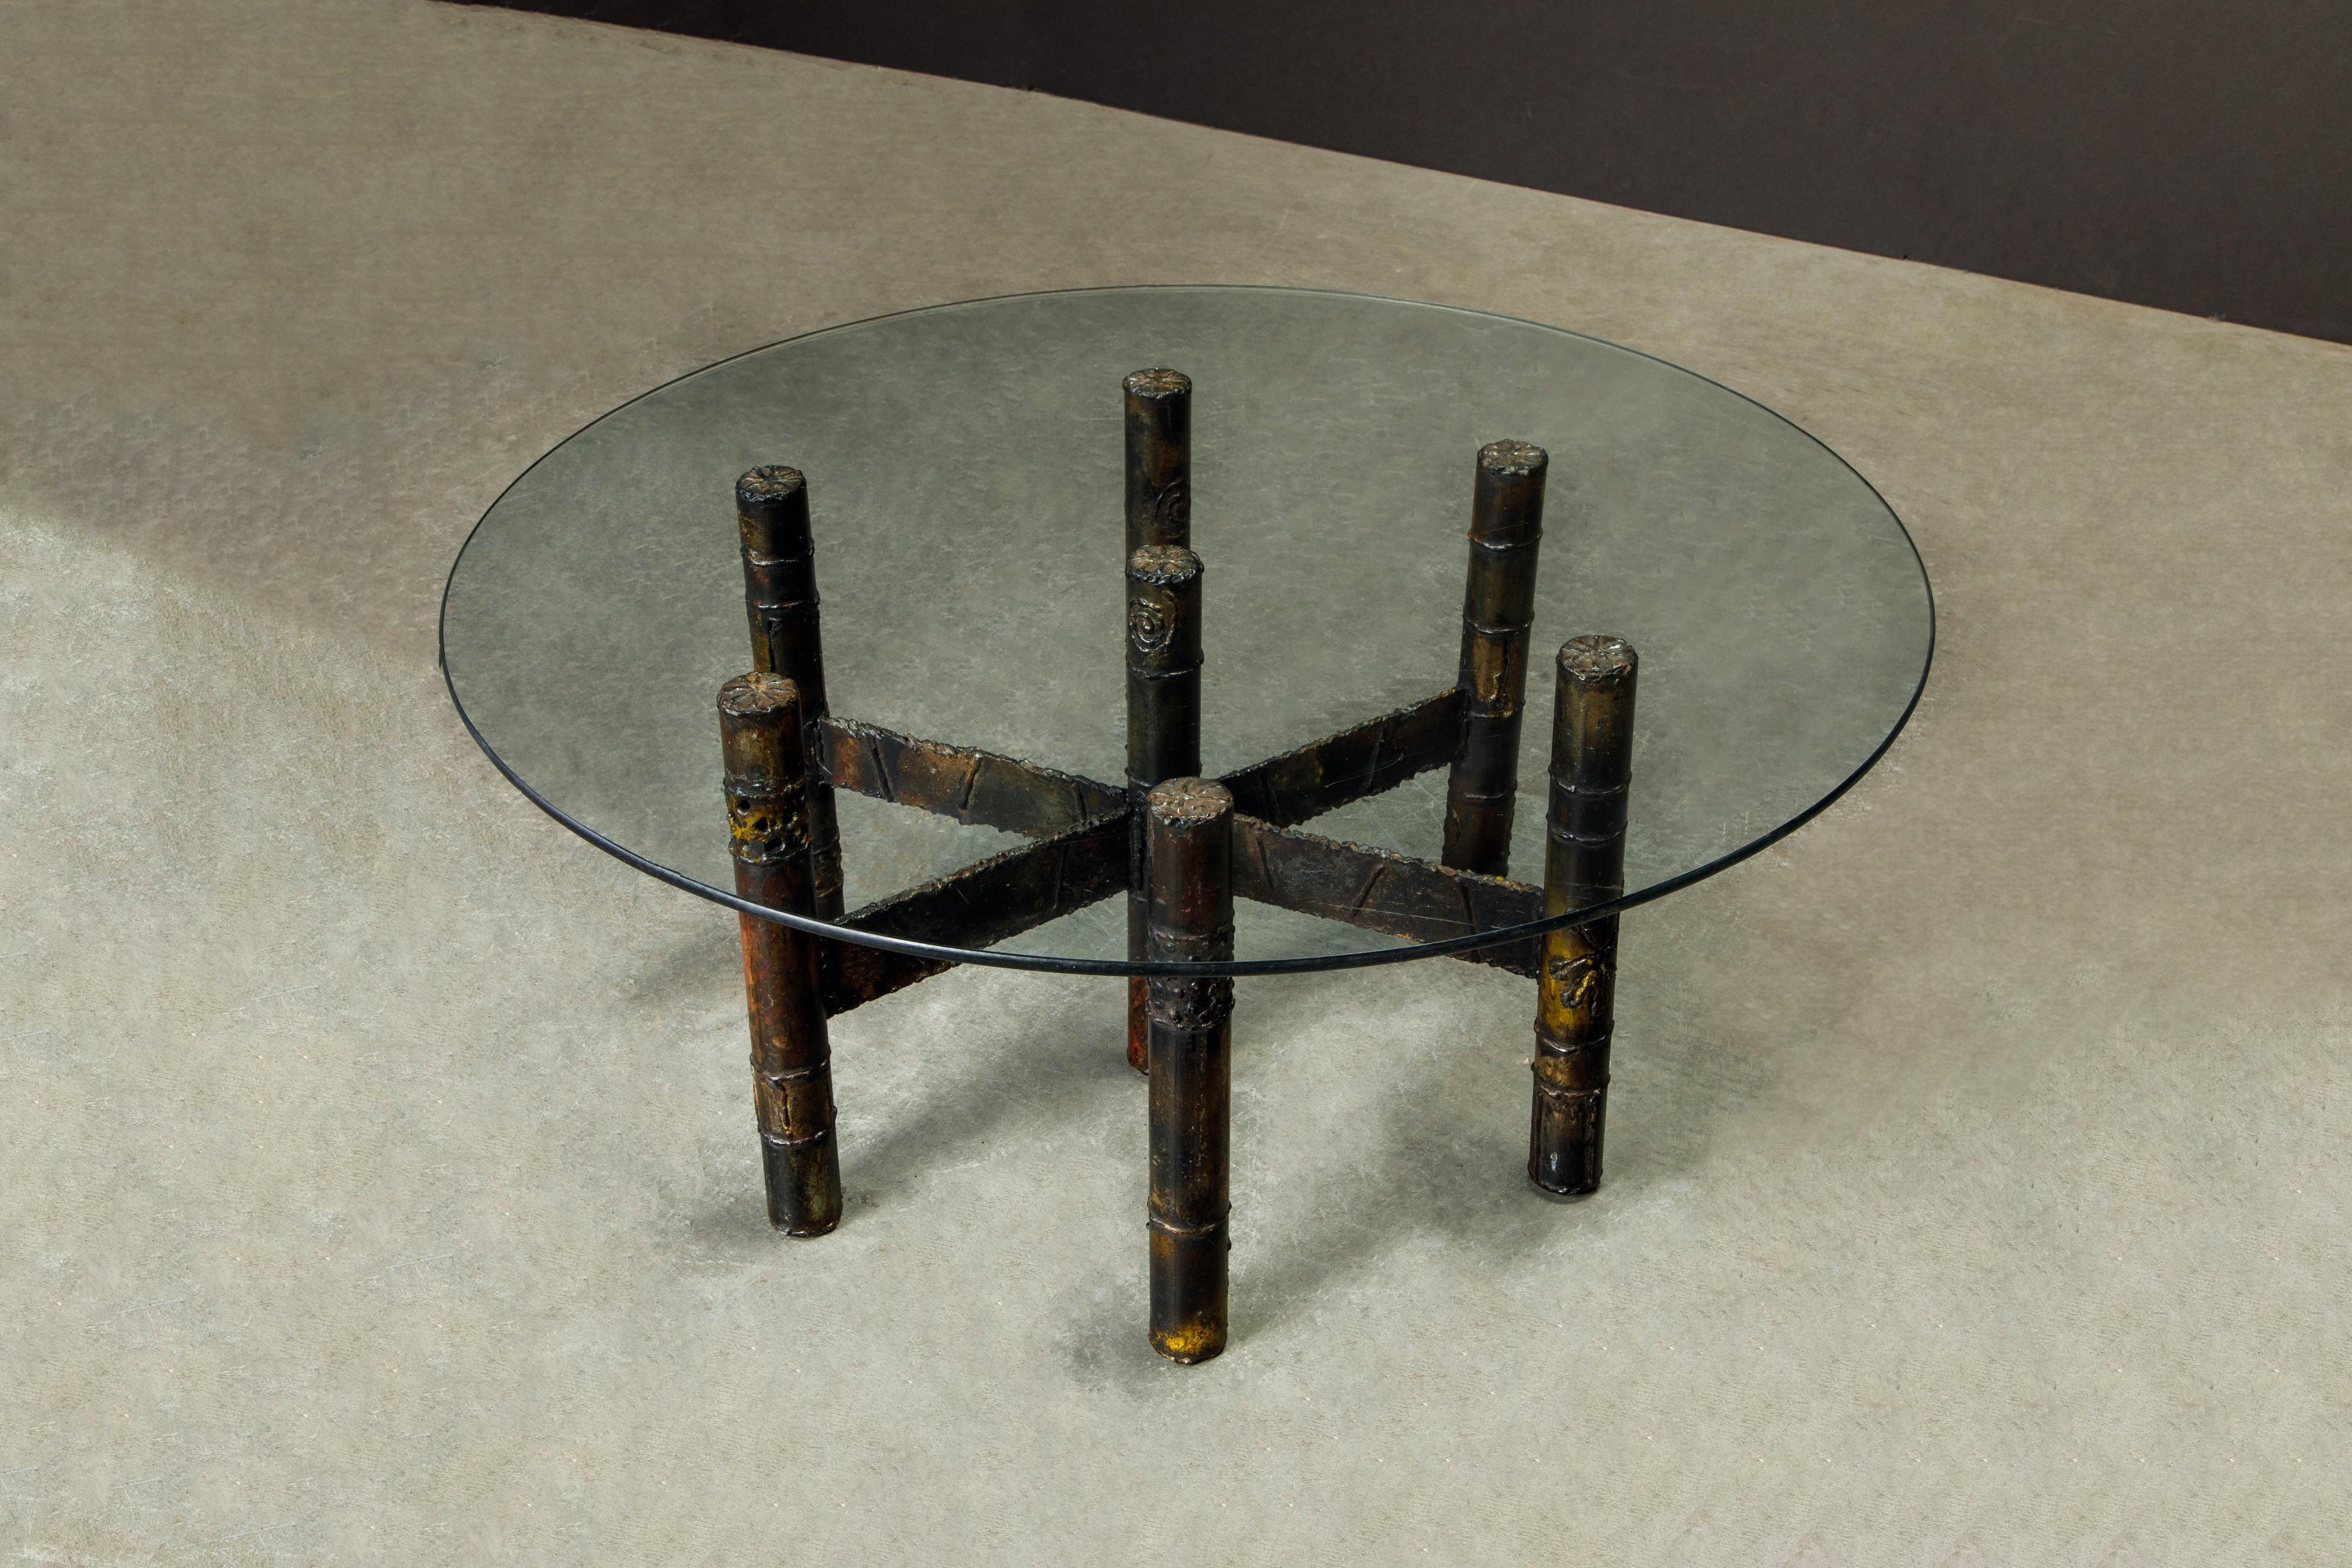 Patinated Paul Evans Brutalist Cocktail Table in Oxidized Steel and Bronze, c. 1970